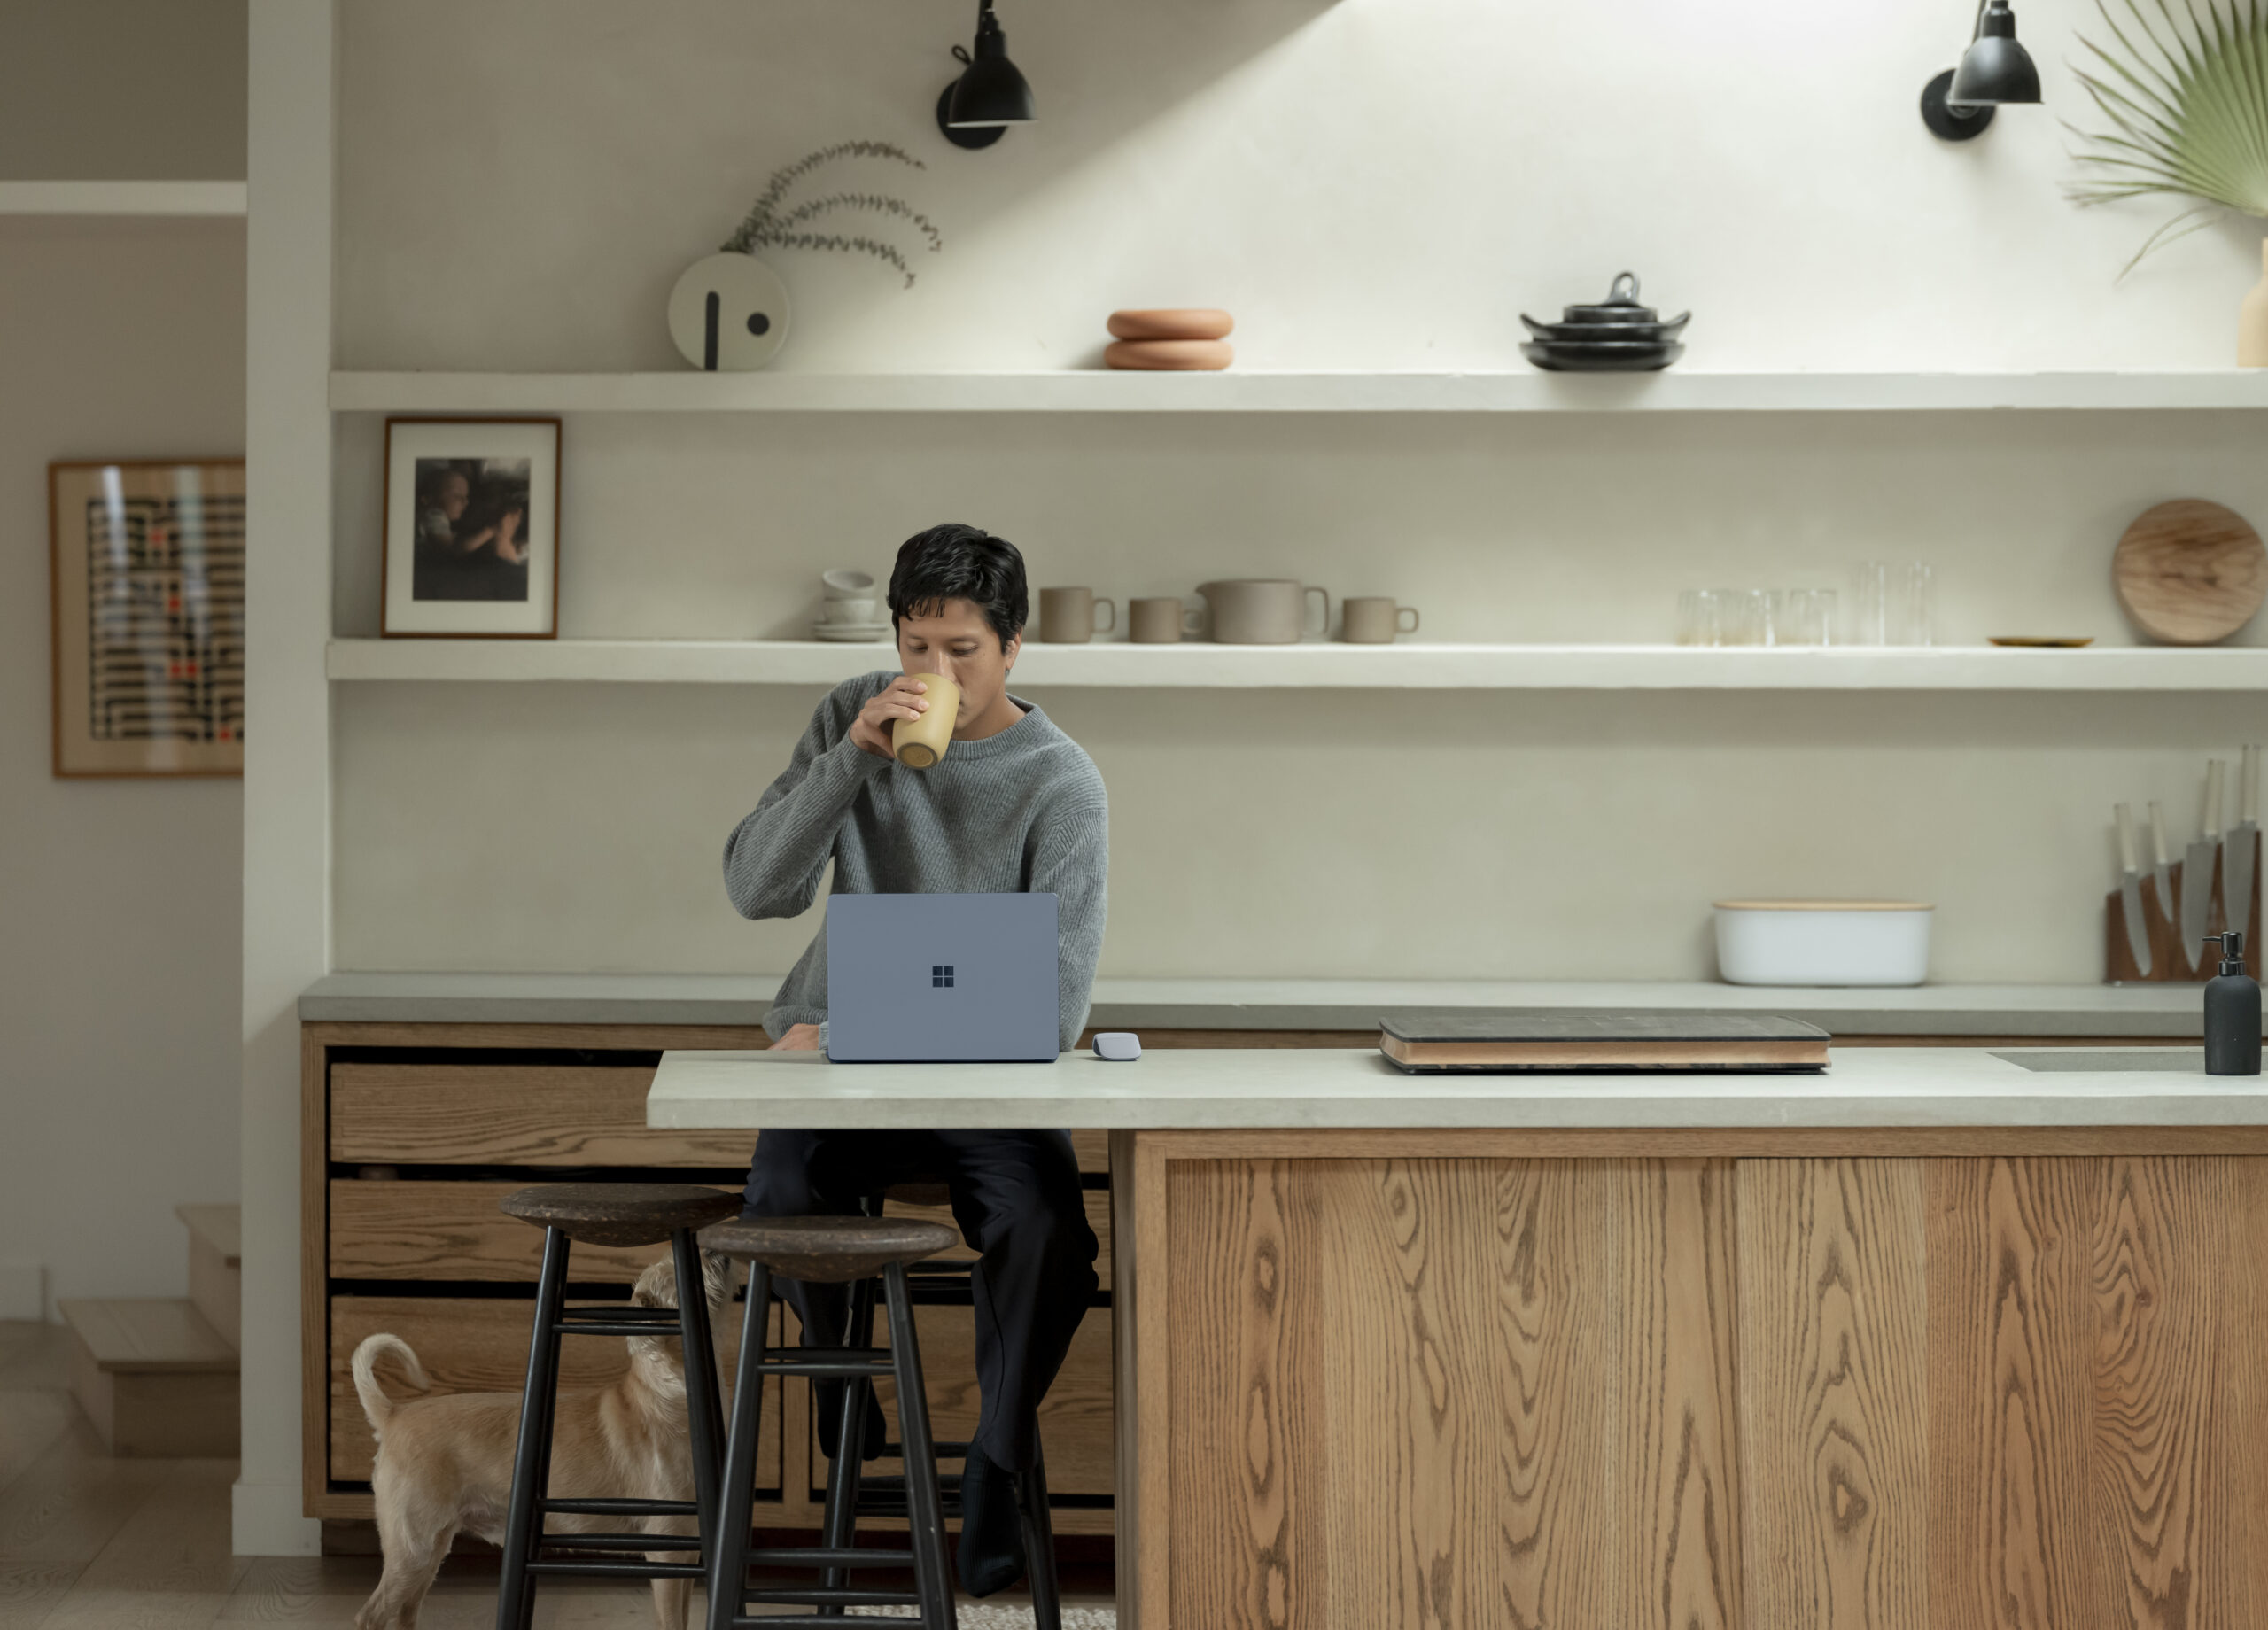 Photo of a man working on a laptop in a kitchen.